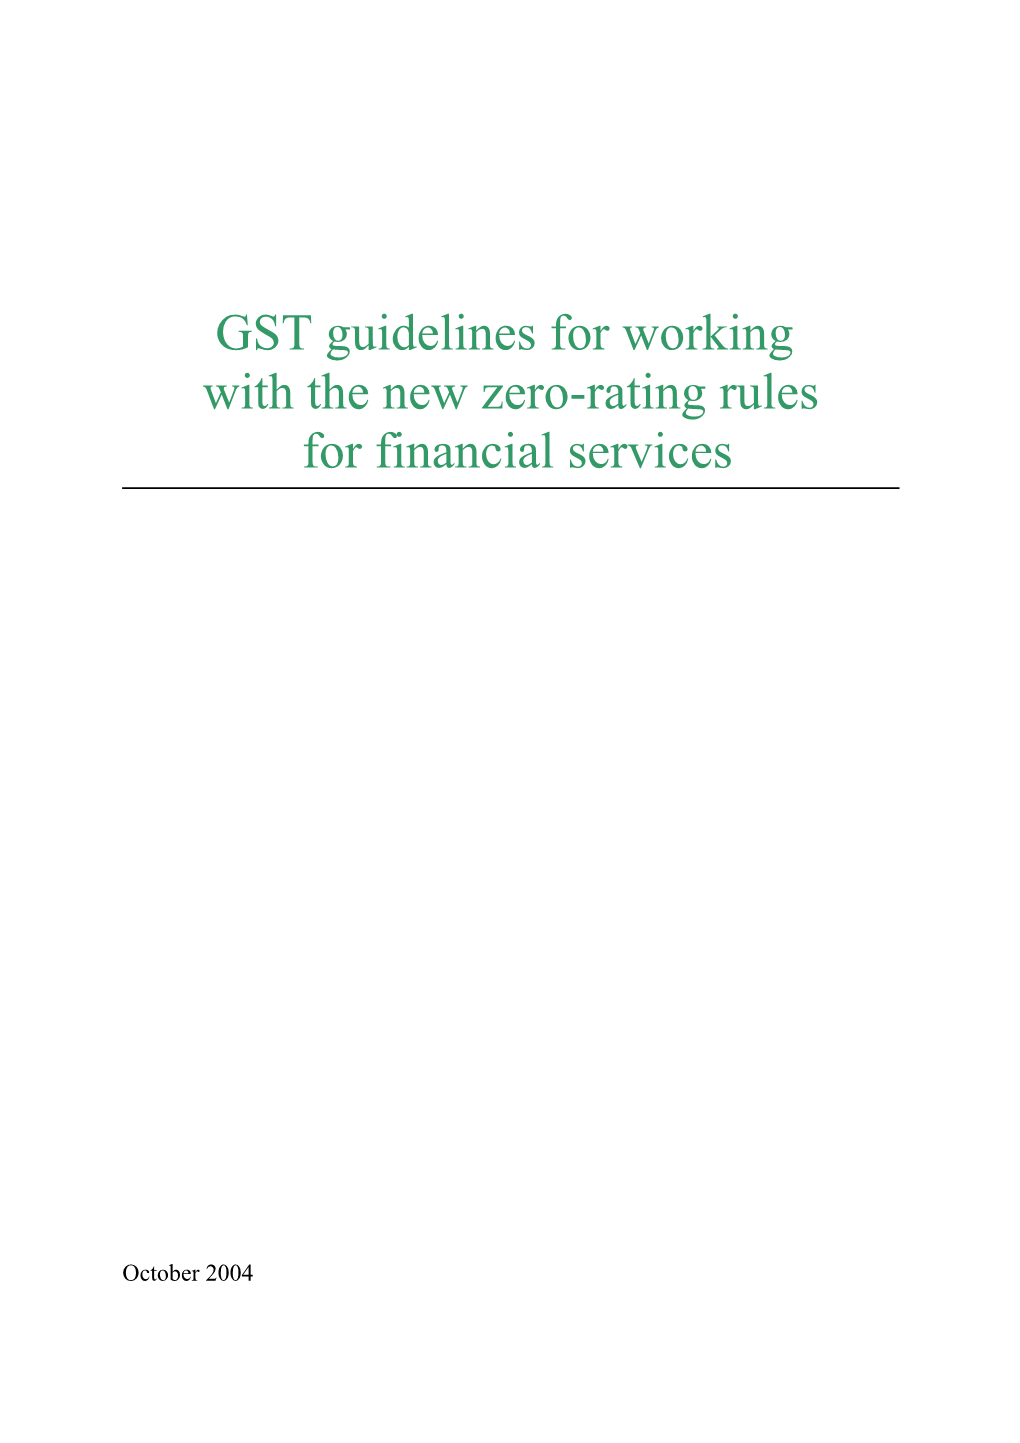 GST Guidelines for Working with the New Zero-Rating Rules for Financial Services